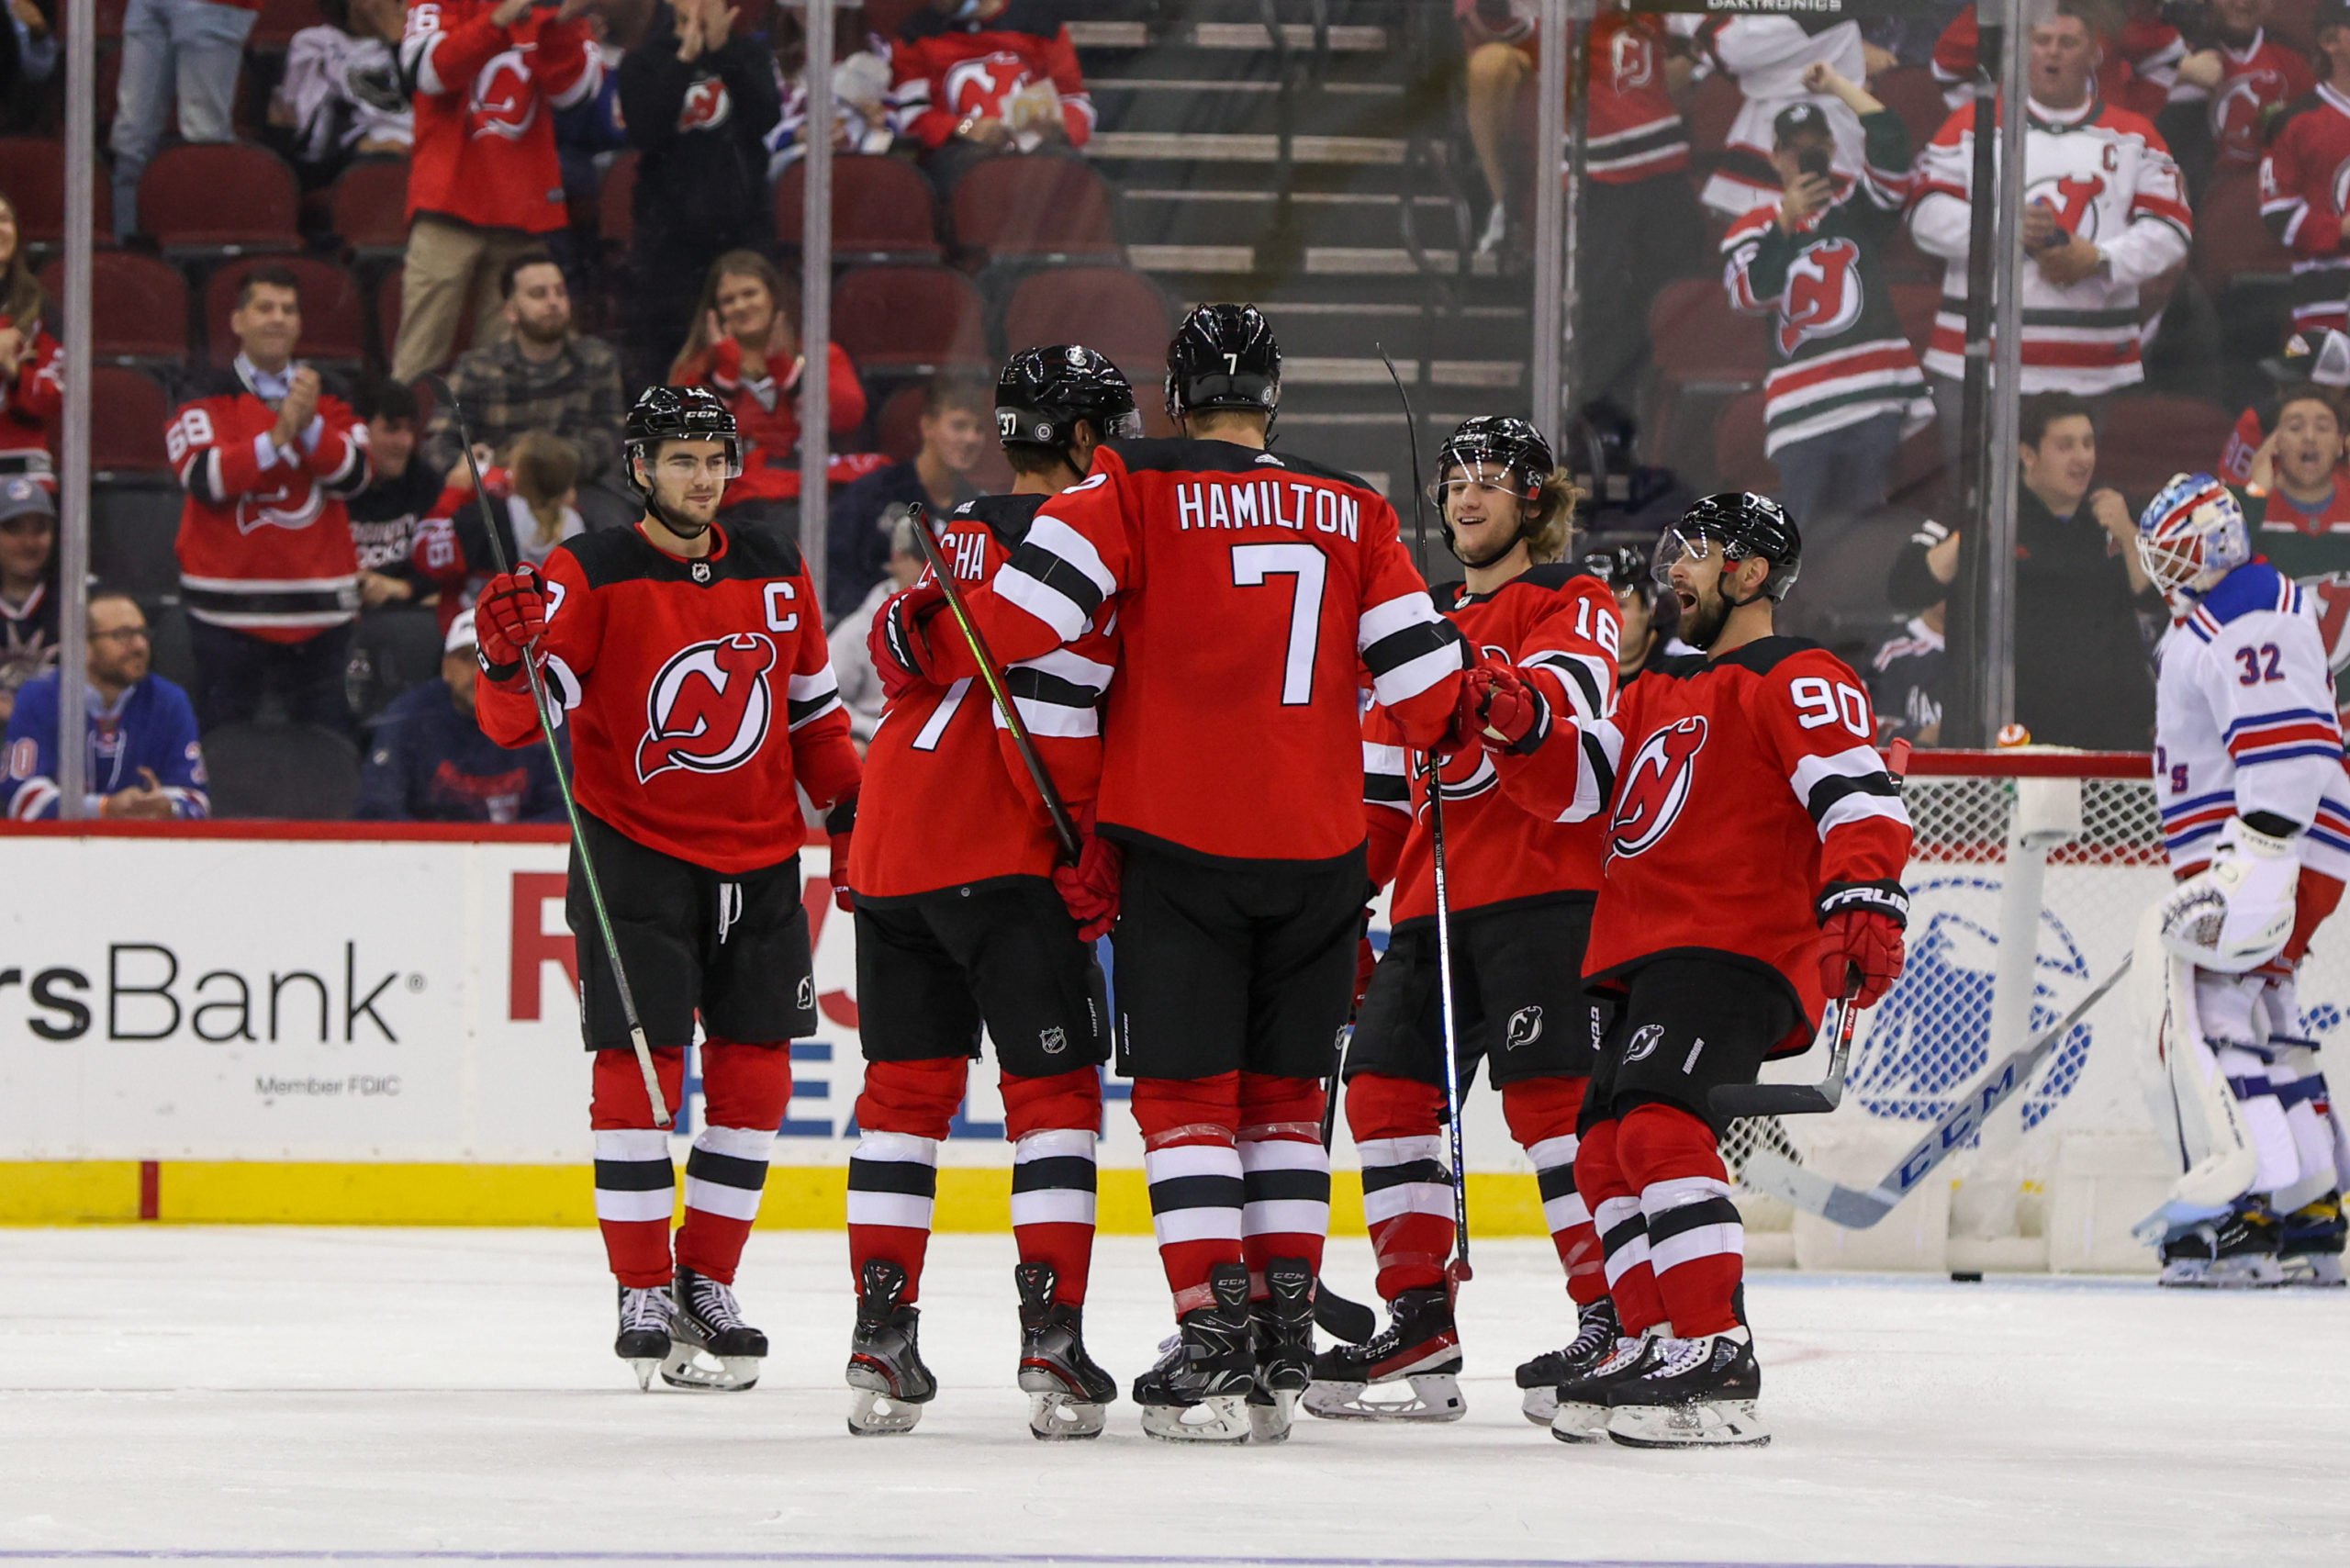 COLUMN: Devils Play of Late is Encouraging